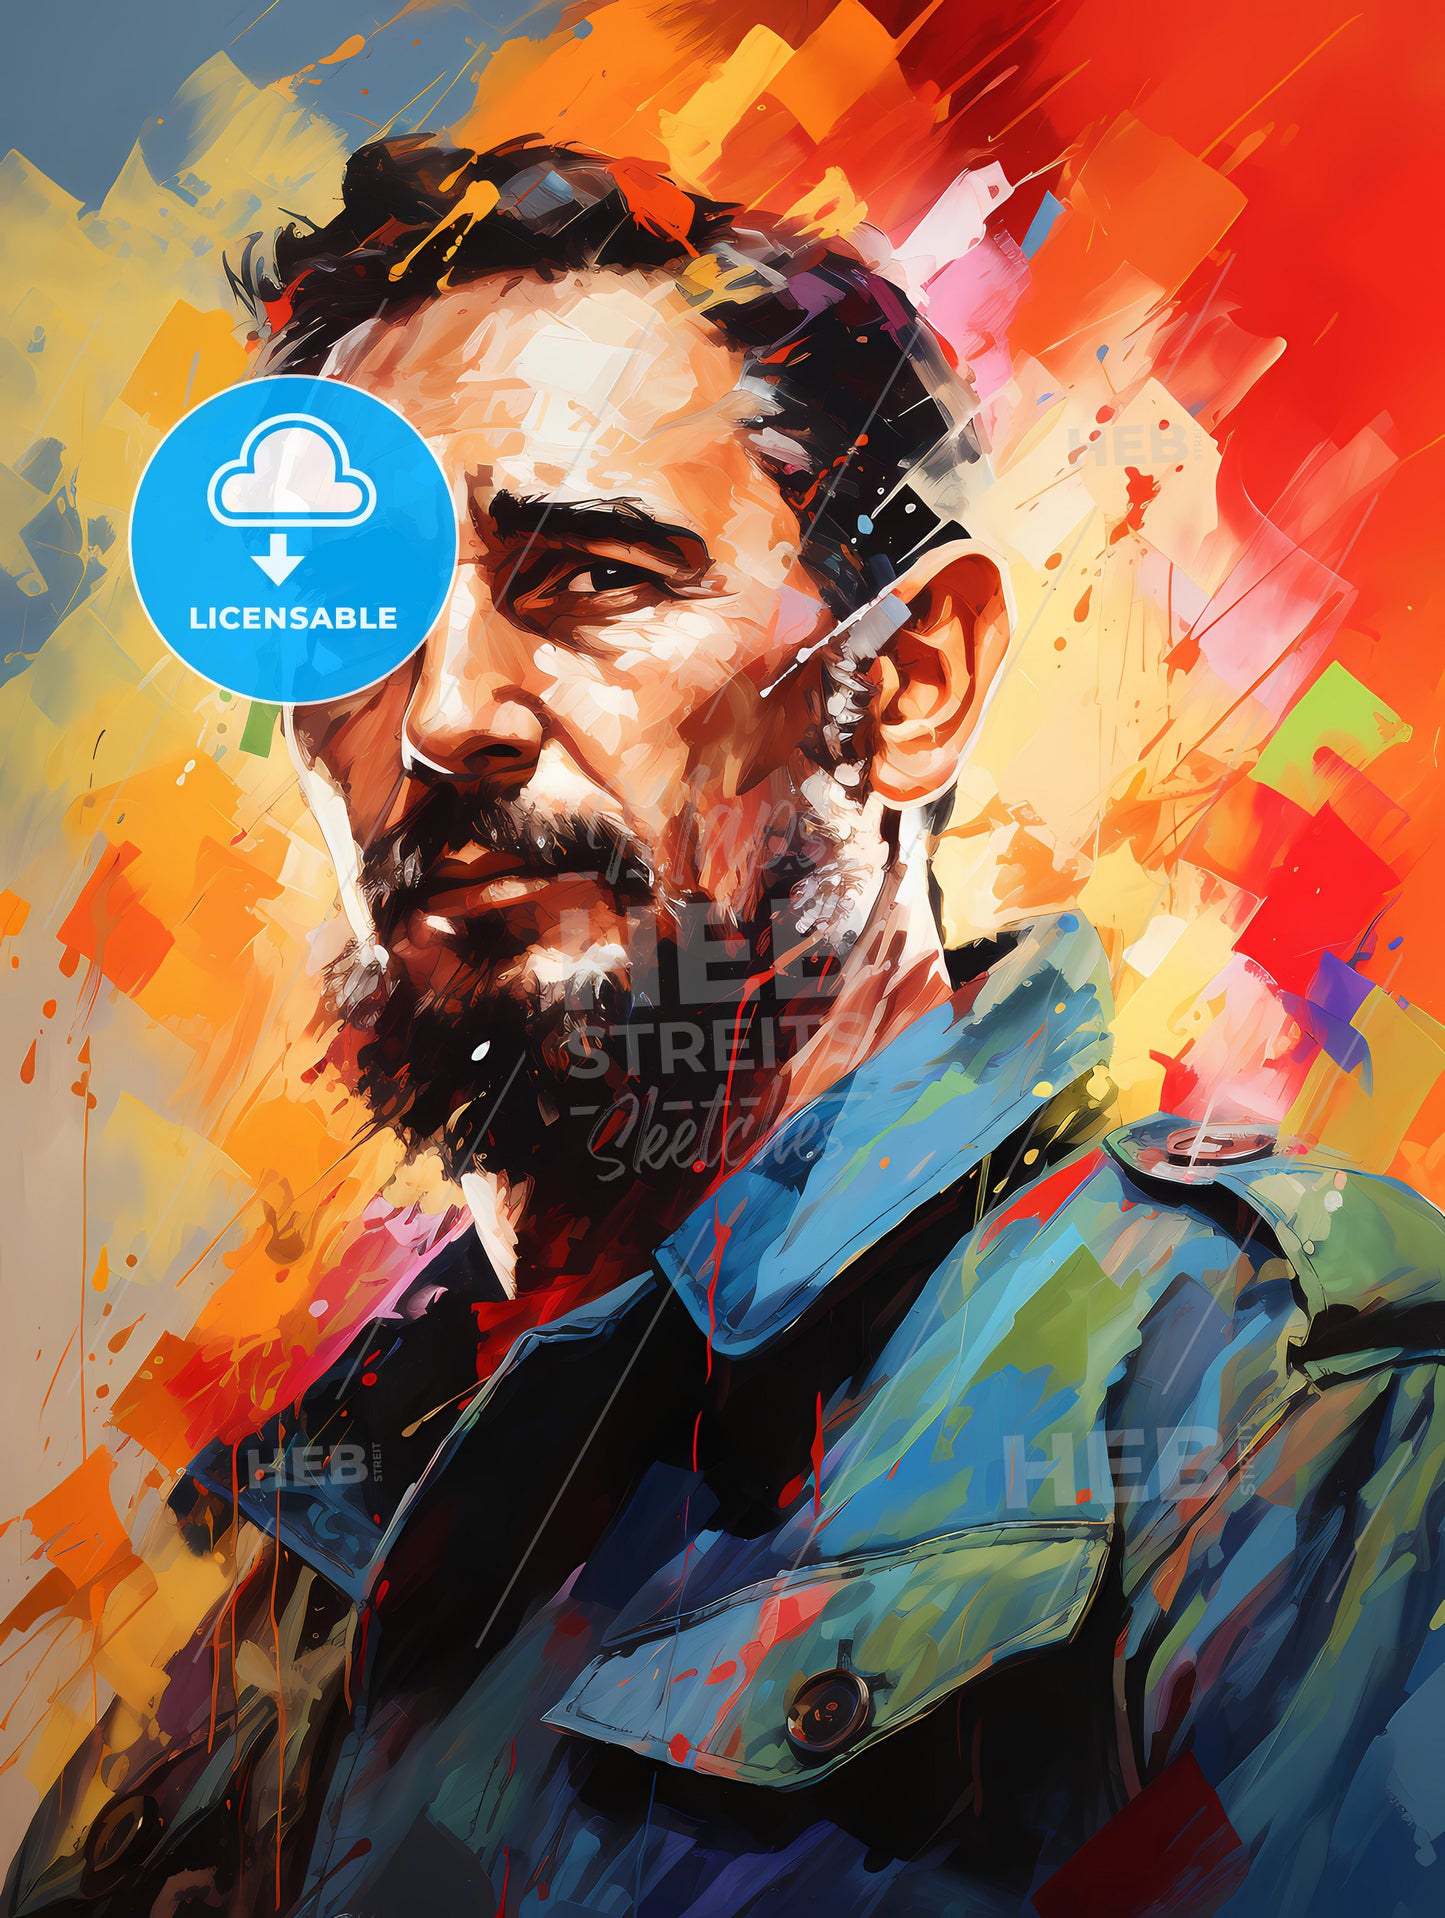 Fidel Castro - A Painting Of A Man With A Beard